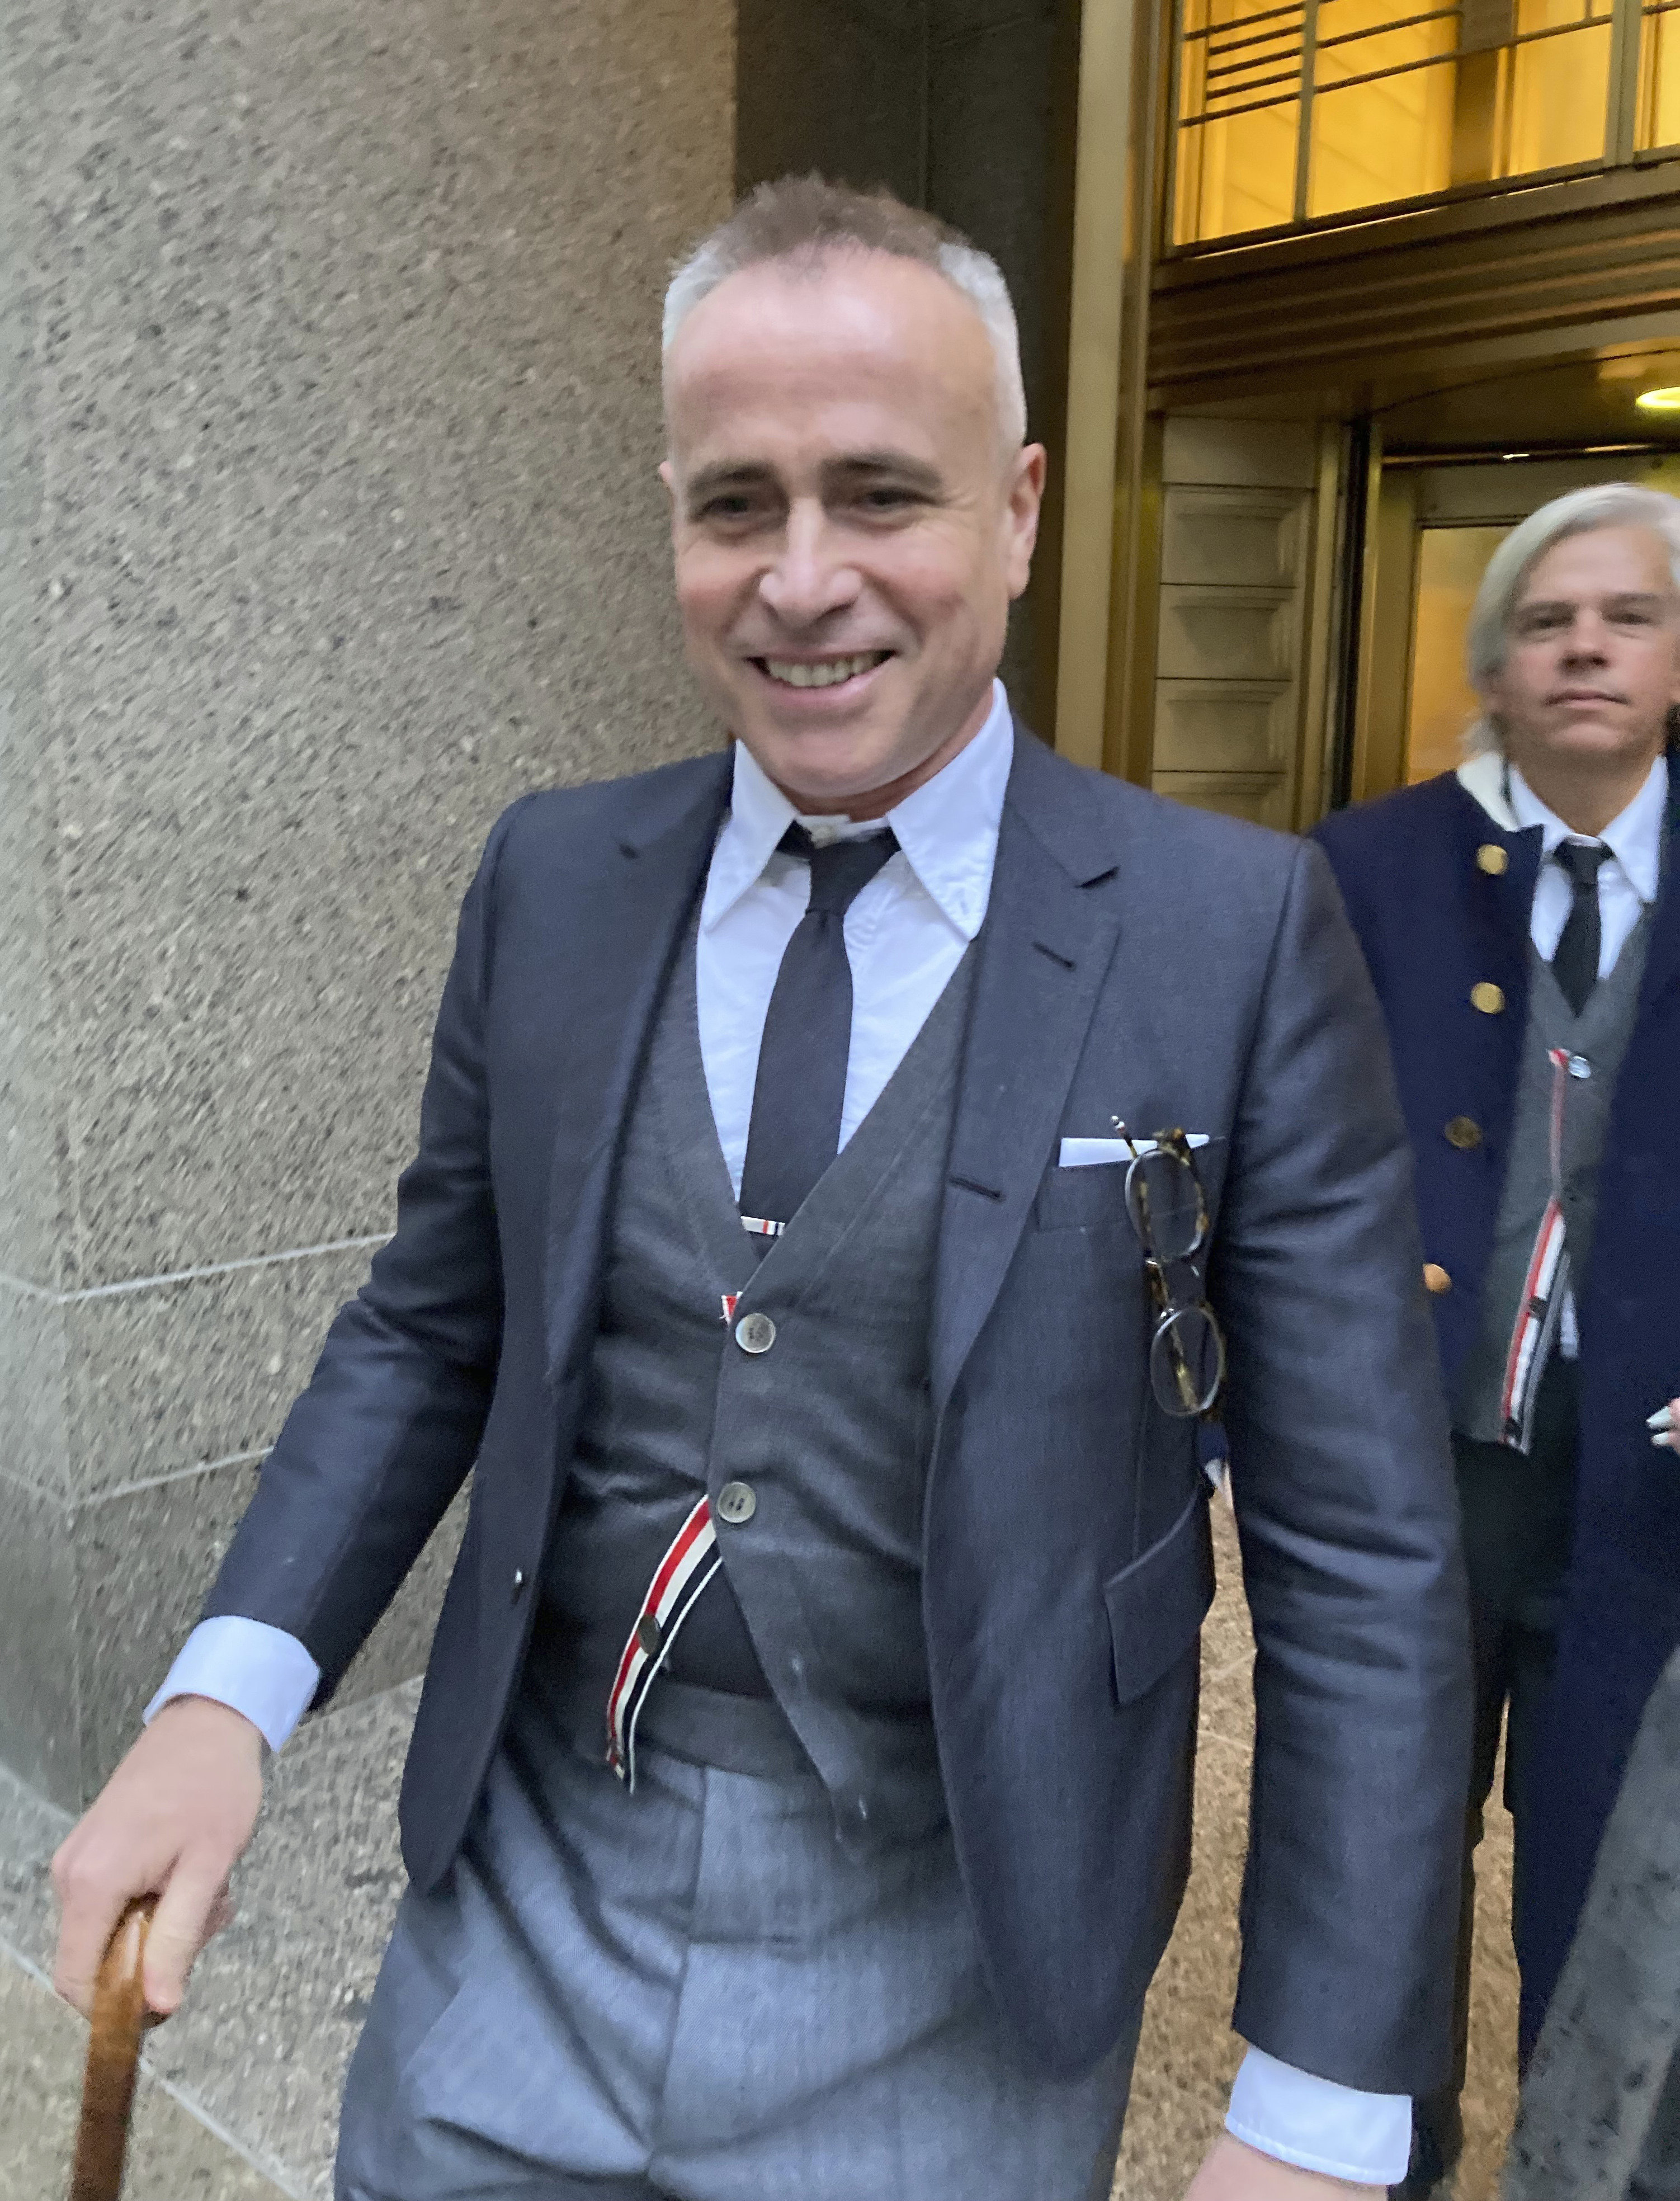 Fashion designer Thom Browne leaves Manhattan federal court after a jury decided he did not infringe the trademark of sportswear giant Adidas. Photo: AP